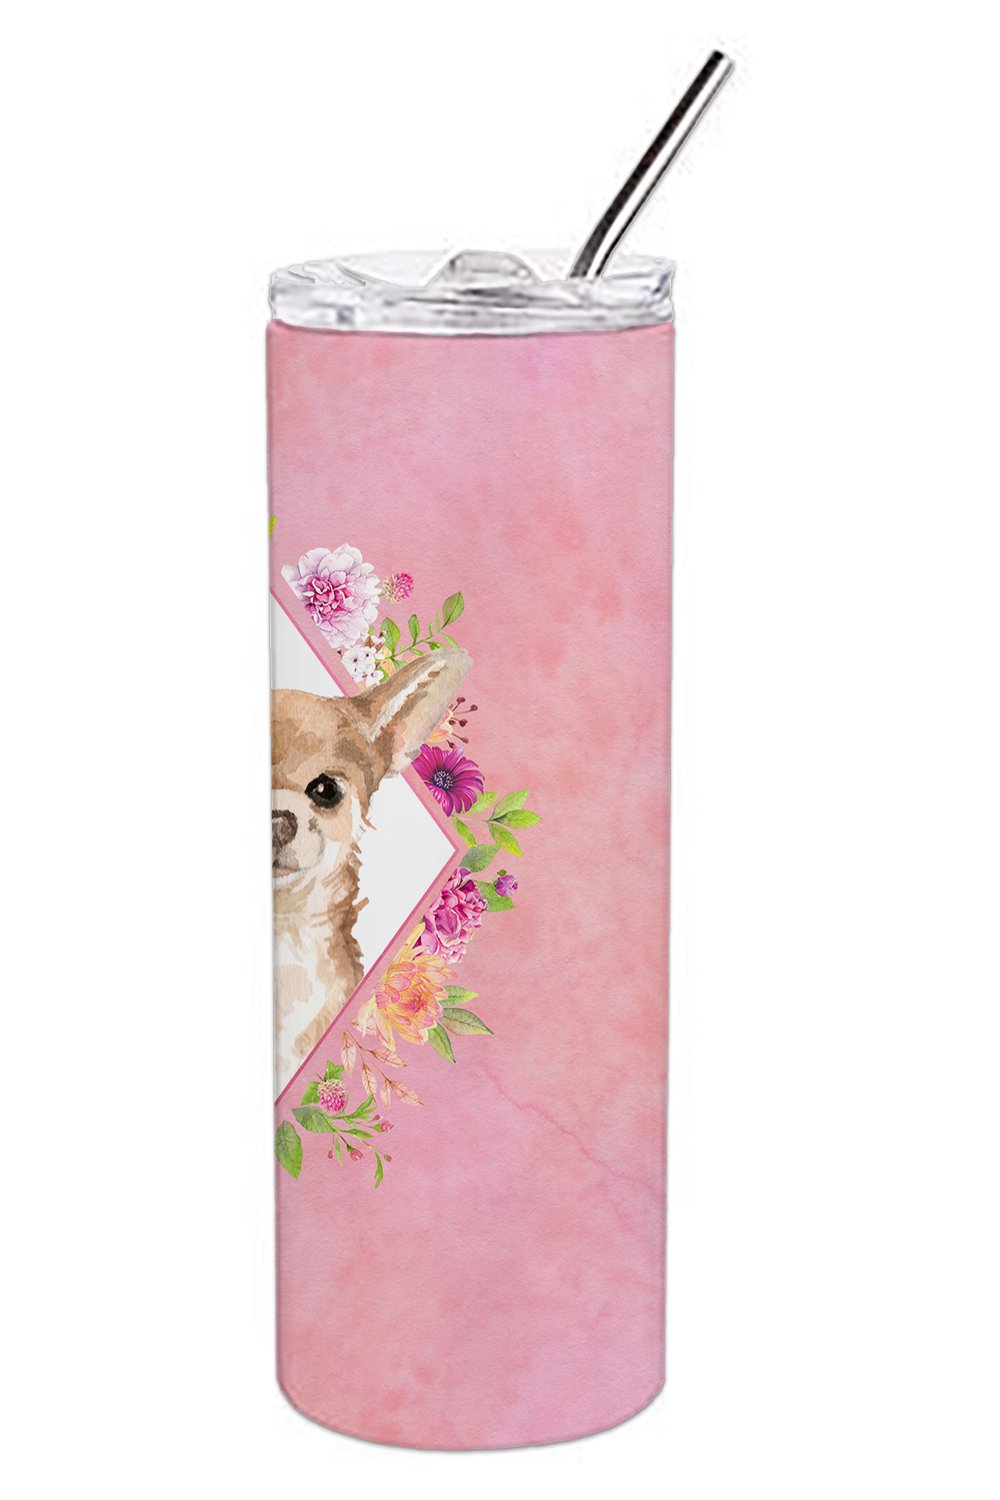 Chihuahua Pink Flowers Double Walled Stainless Steel 20 oz Skinny Tumbler CK4245TBL20 by Caroline's Treasures